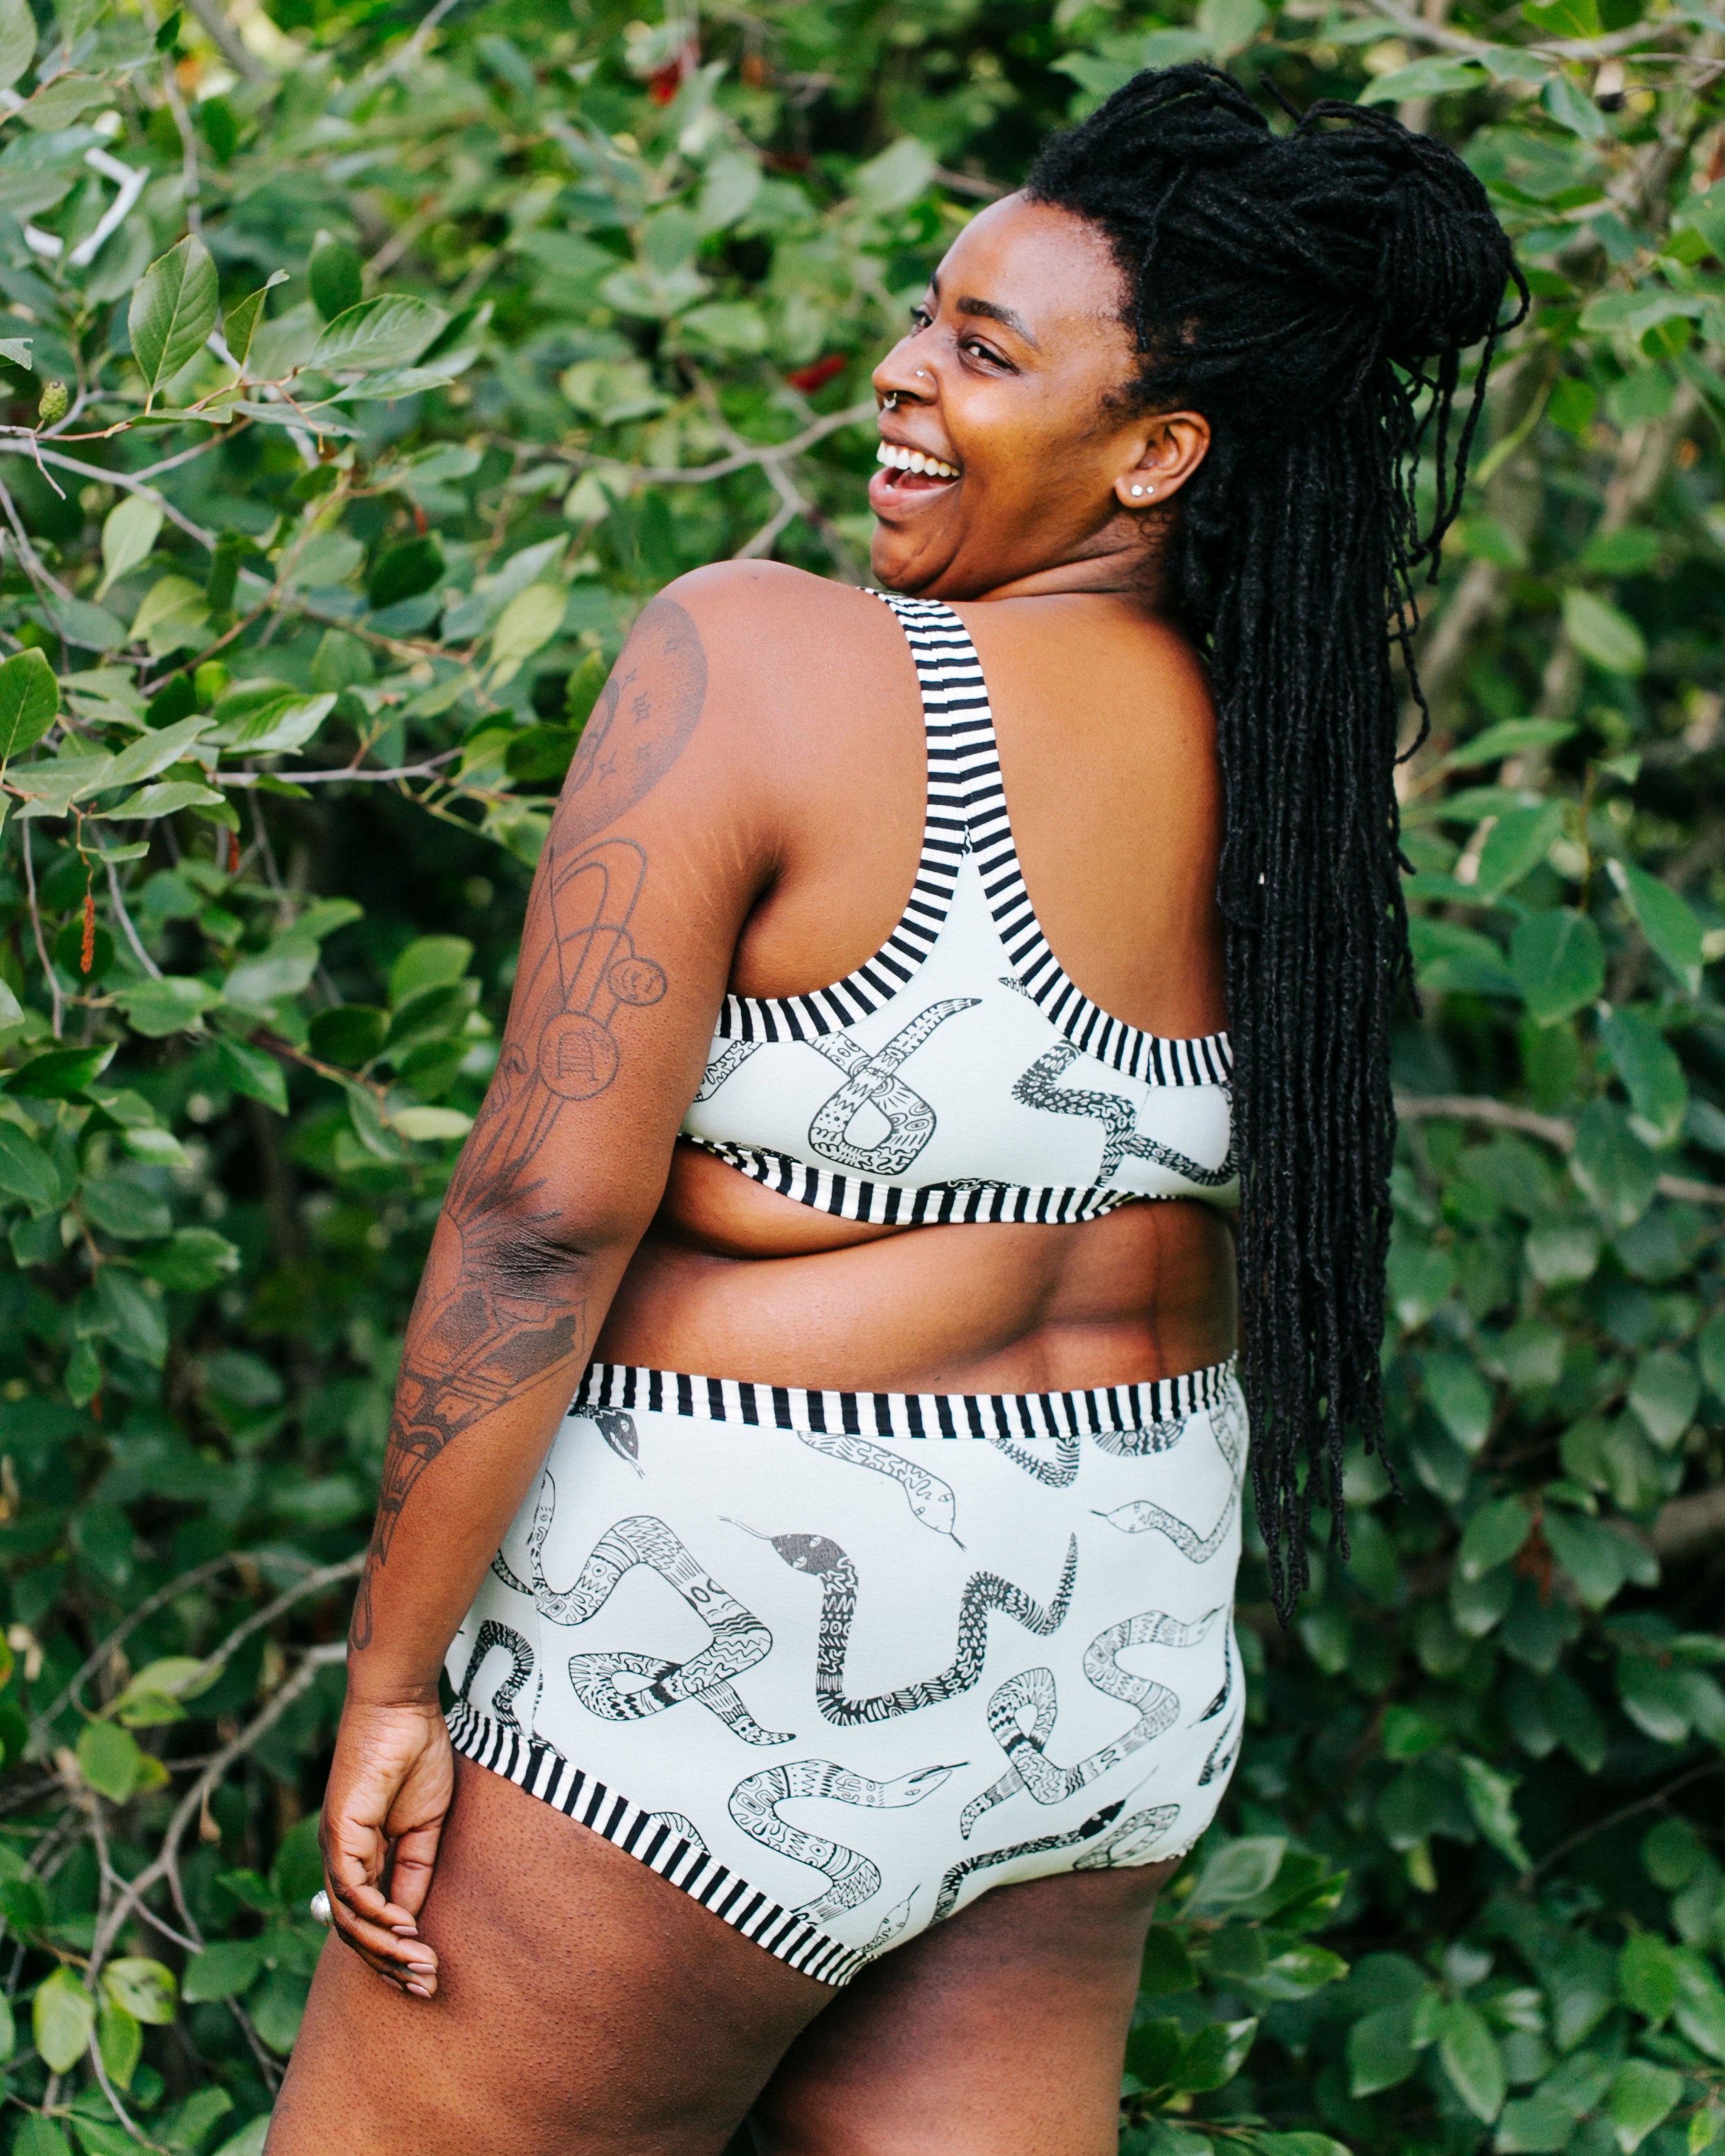 Model smiling over her shoulder with her back to us wearing Thunderpants organic cotton Bralette and Original style underwear in our Sketchy Snakes print: sage color with black sketched snakes and black and white stripe binding.